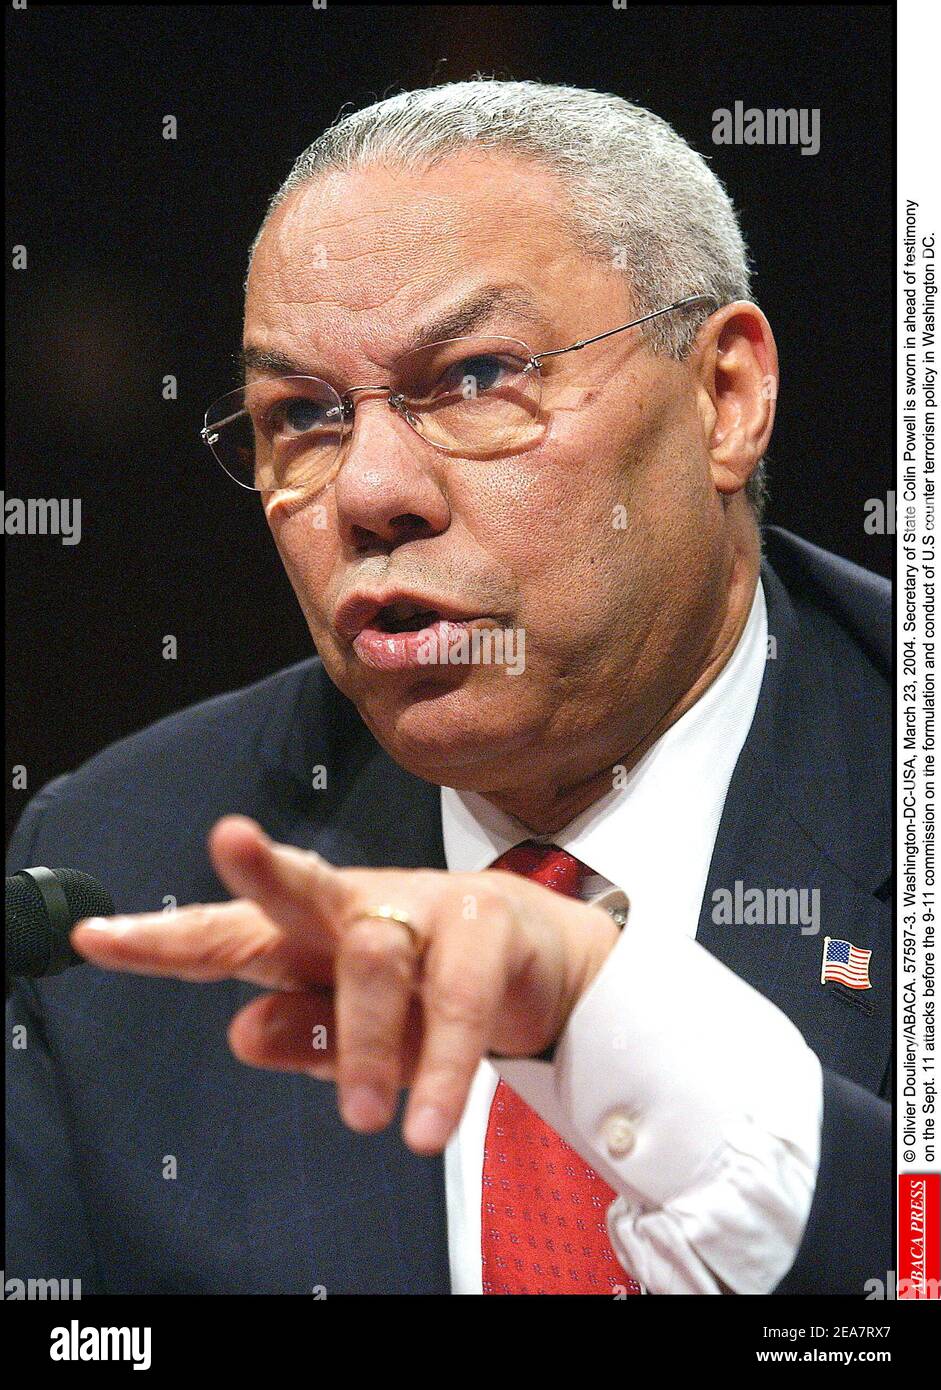 © Olivier Douliery/ABACA. 57597-3. Washington-DC-USA, March 23, 2004. Secretary of State Colin Powell is sworn in ahead of testimony on the Sept. 11 attacks before the 9-11 commission on the formulation and conduct of U.S counter terrorism policy in Washington DC. Stock Photo